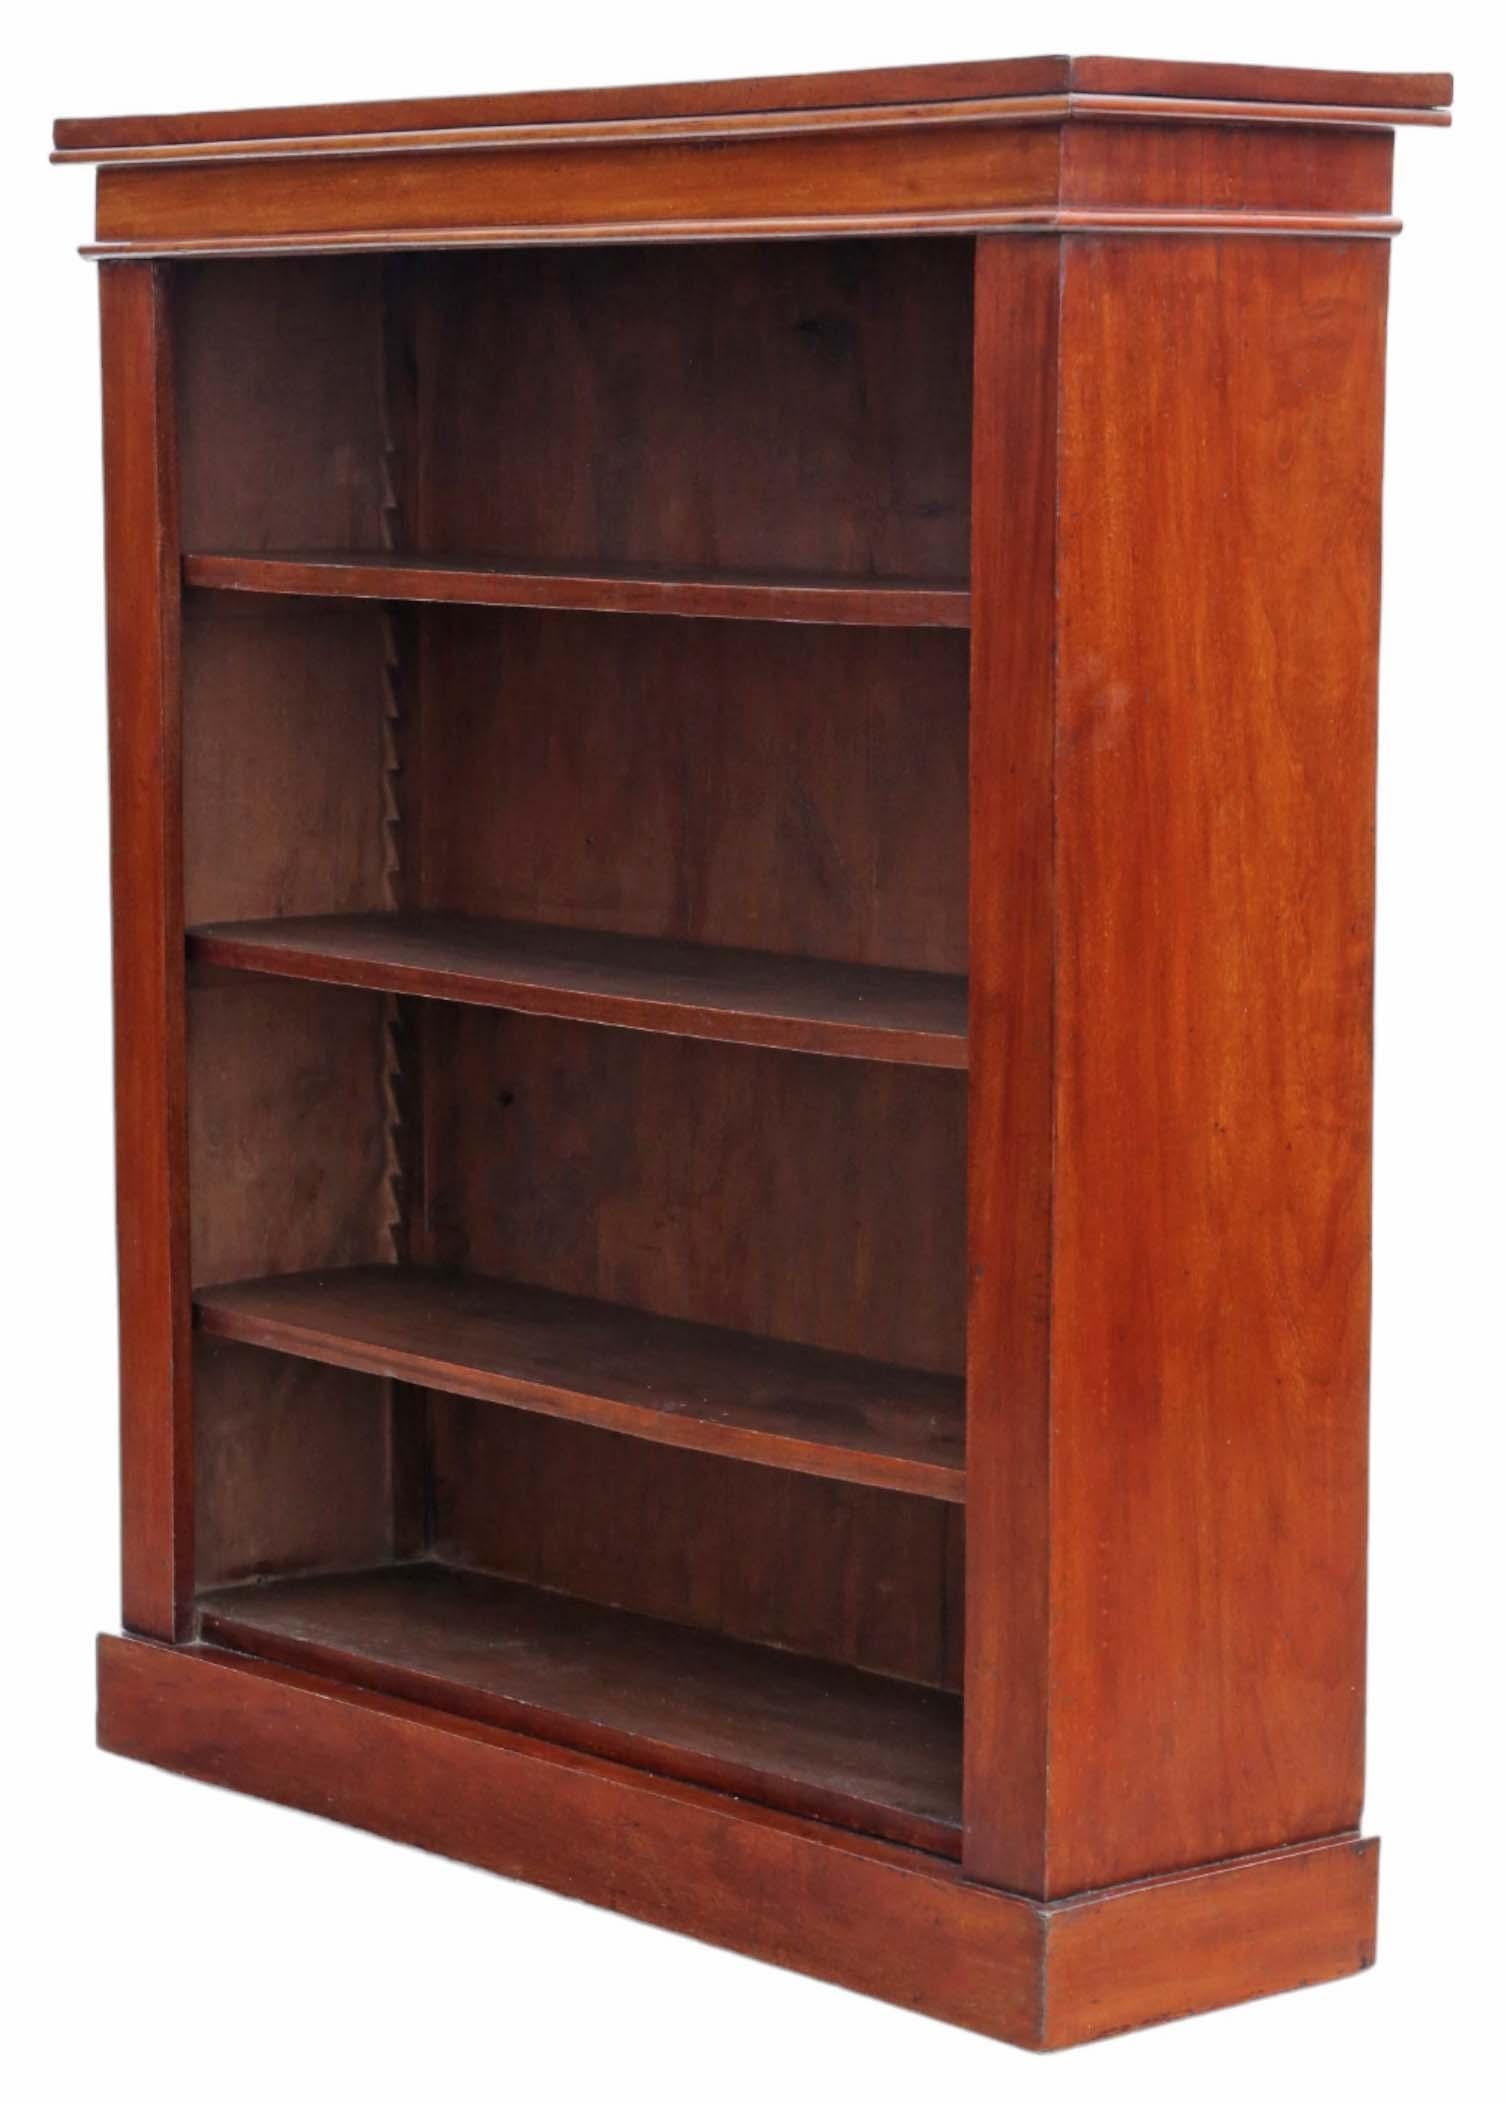 Antique, large, fine-quality 19th Century mahogany adjustable bookcase.

This bookcase exudes lovely quality and is rich in age, charm, and character.

Solid, with no loose joints, it exhibits just a few historic extinct woodworm holes on the back,